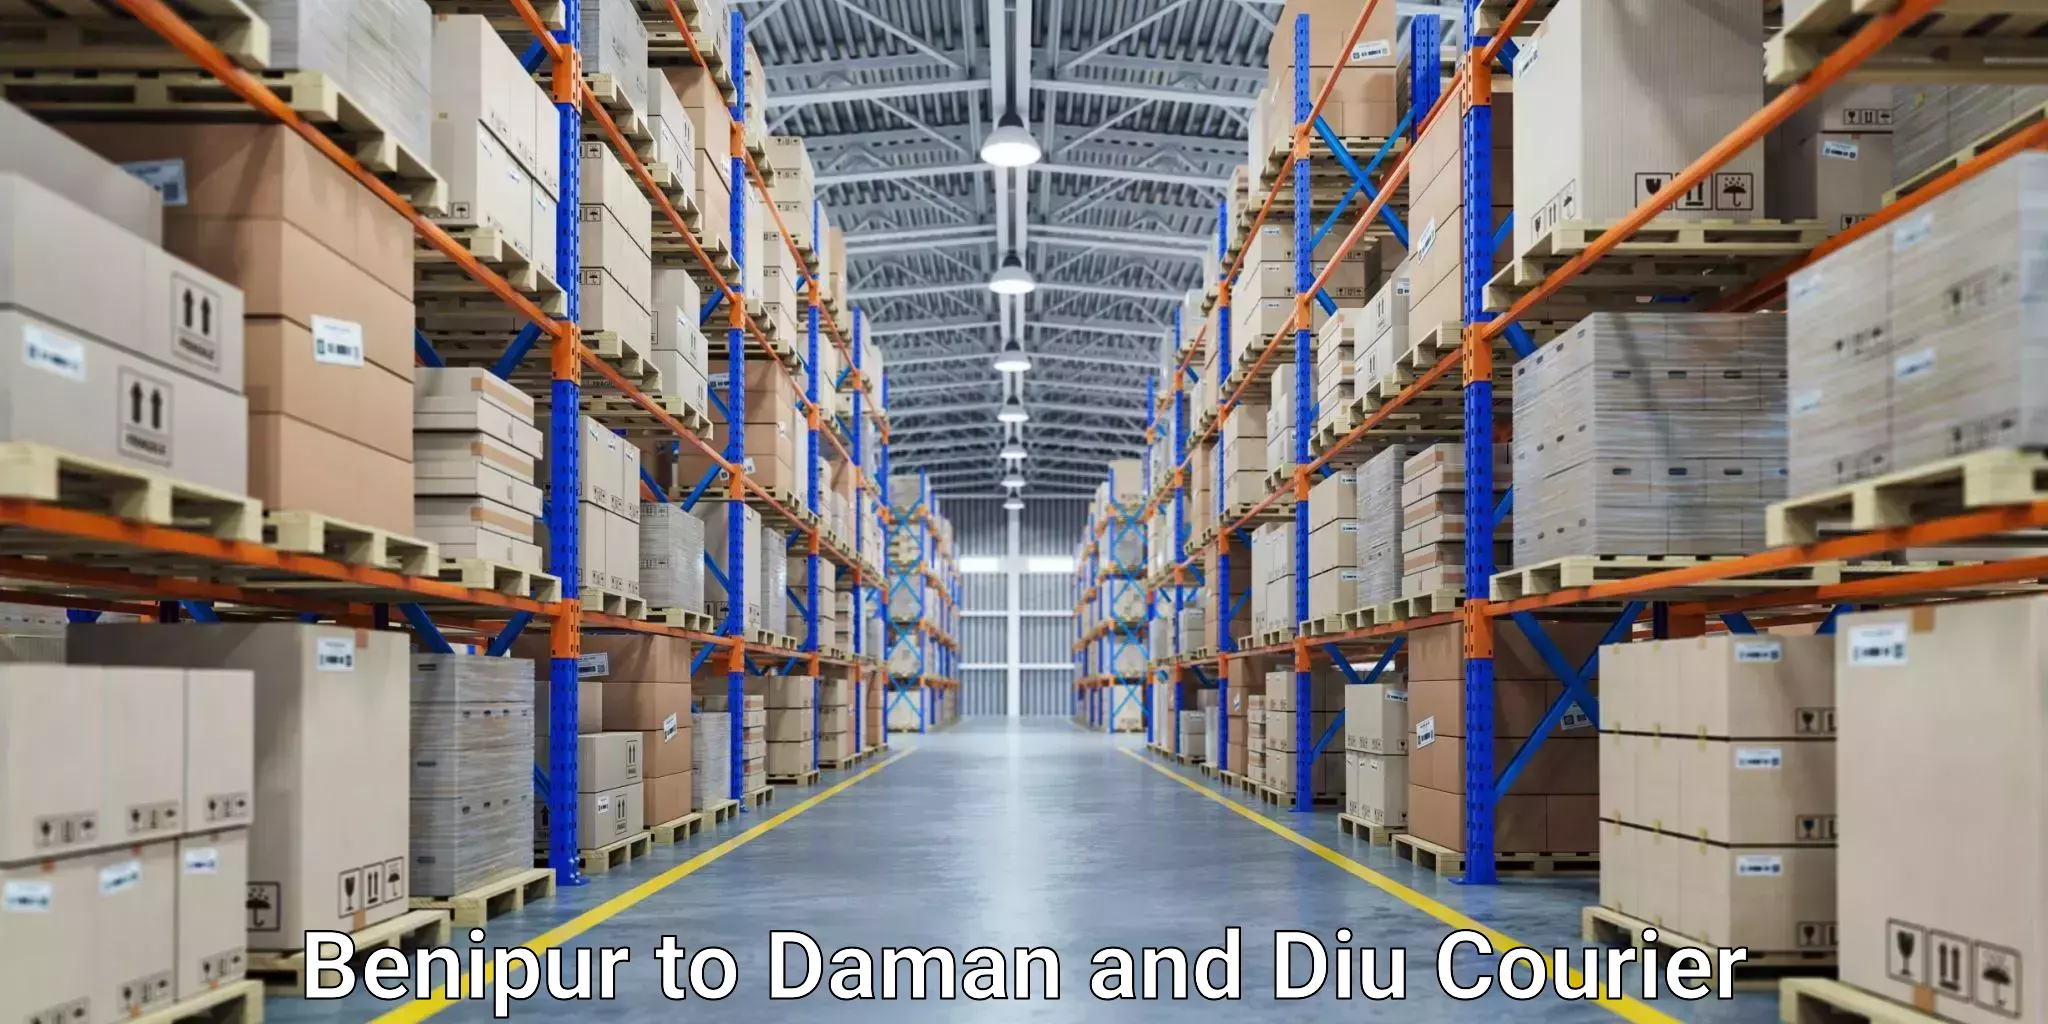 On-demand shipping options Benipur to Daman and Diu